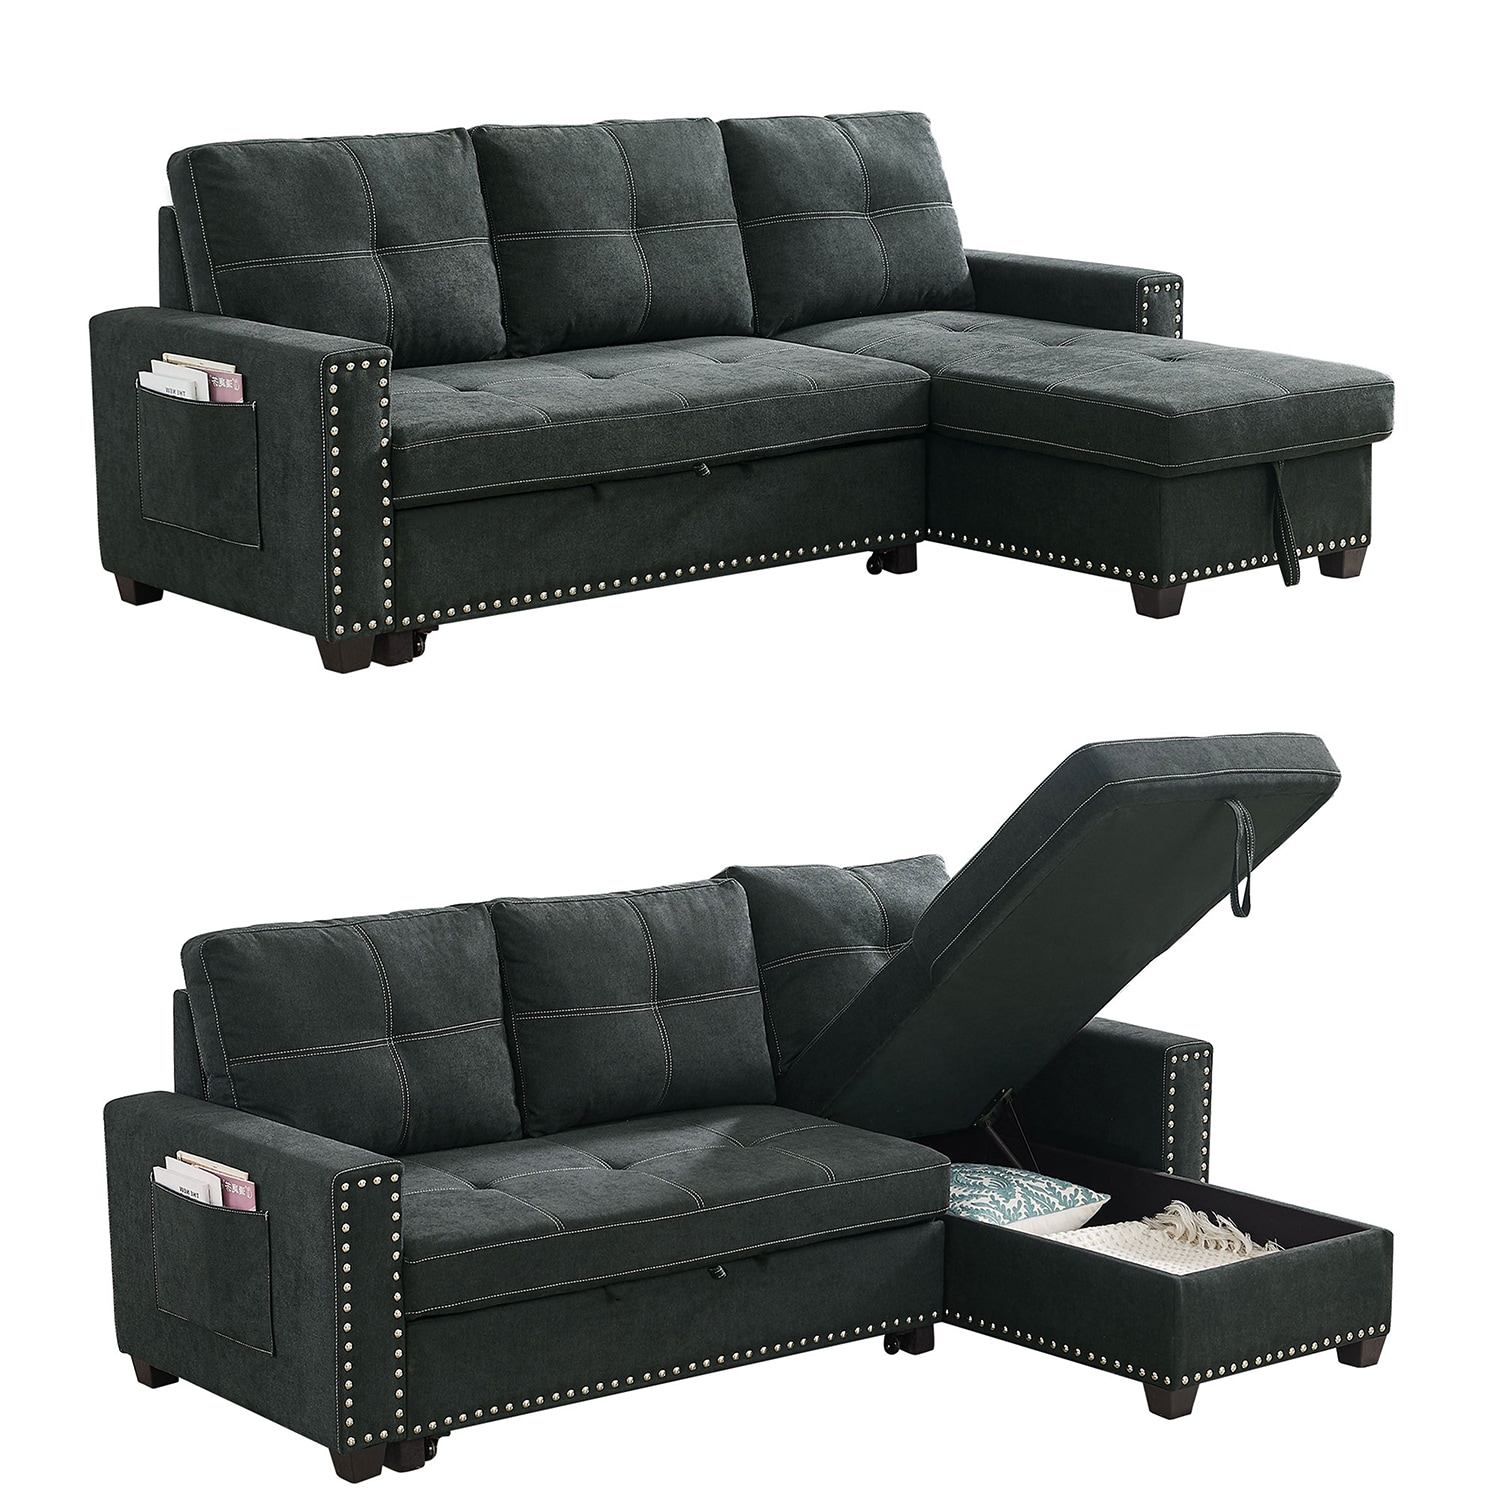 Dodot Couches Ultra Sec - Taille 5 x 54 Couches 11-16 kg 